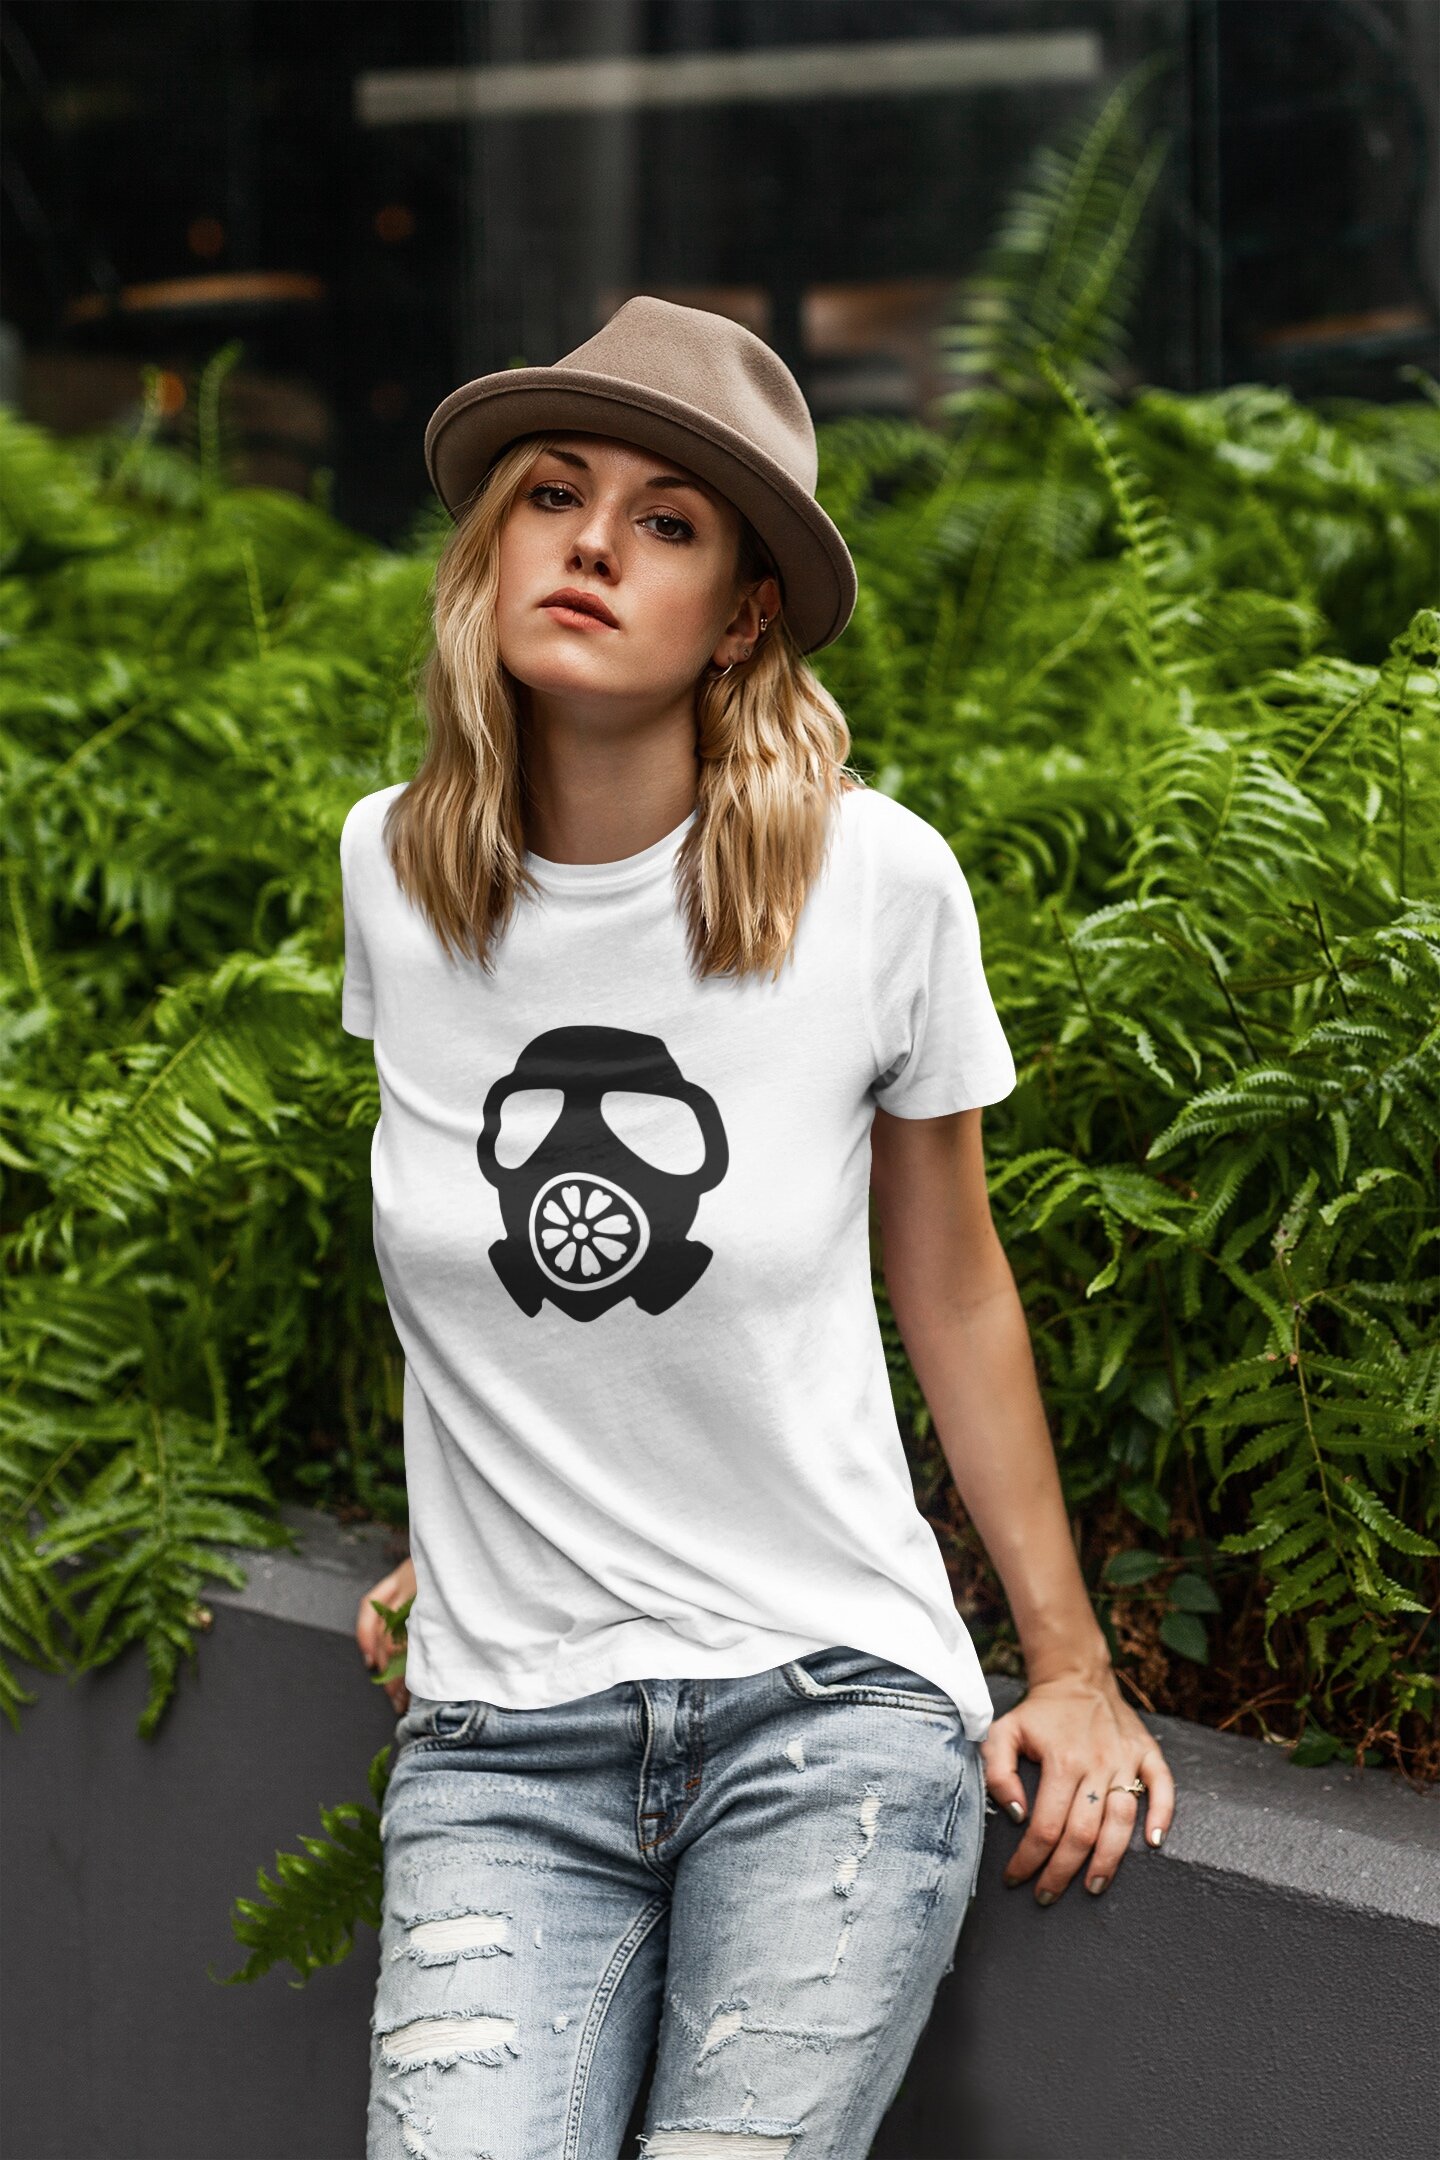 mockup-of-a-woman-with-a-basic-tee-posing-by-some-plants-4327-el1.jpg